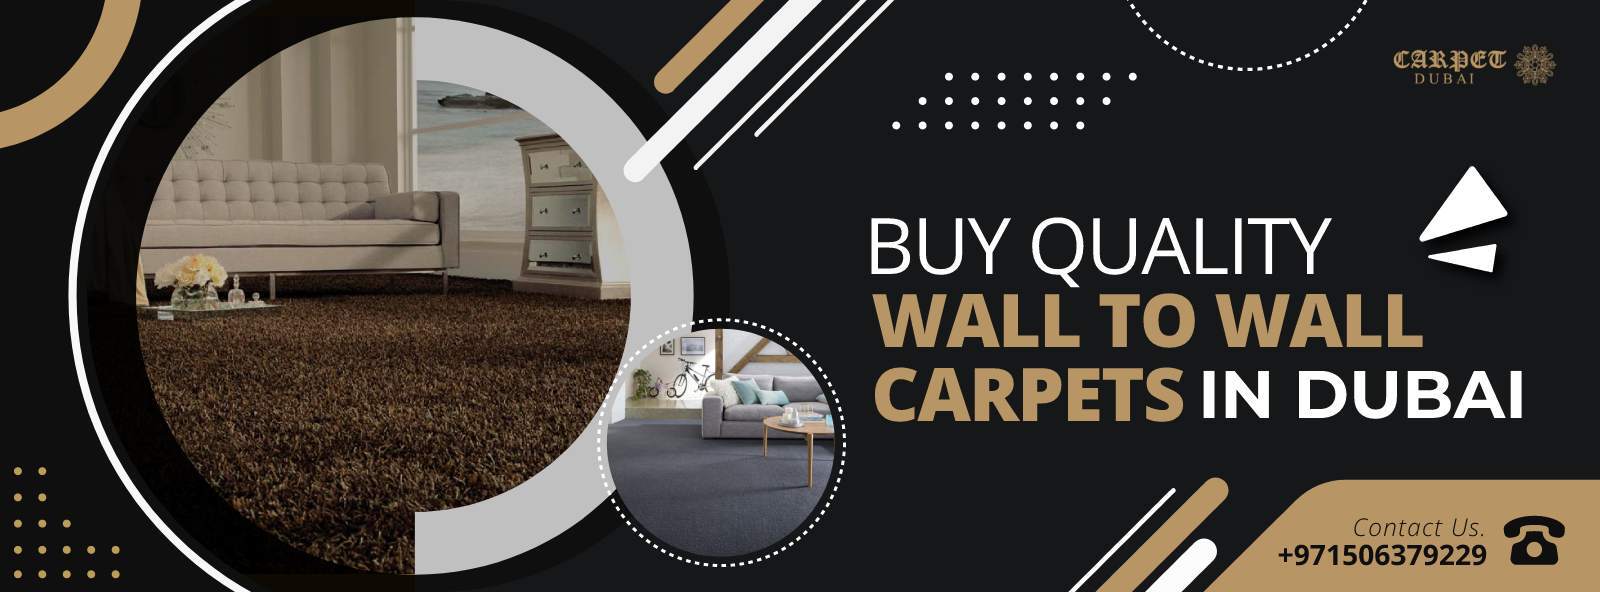 wall to wall carpets in Dubai banner